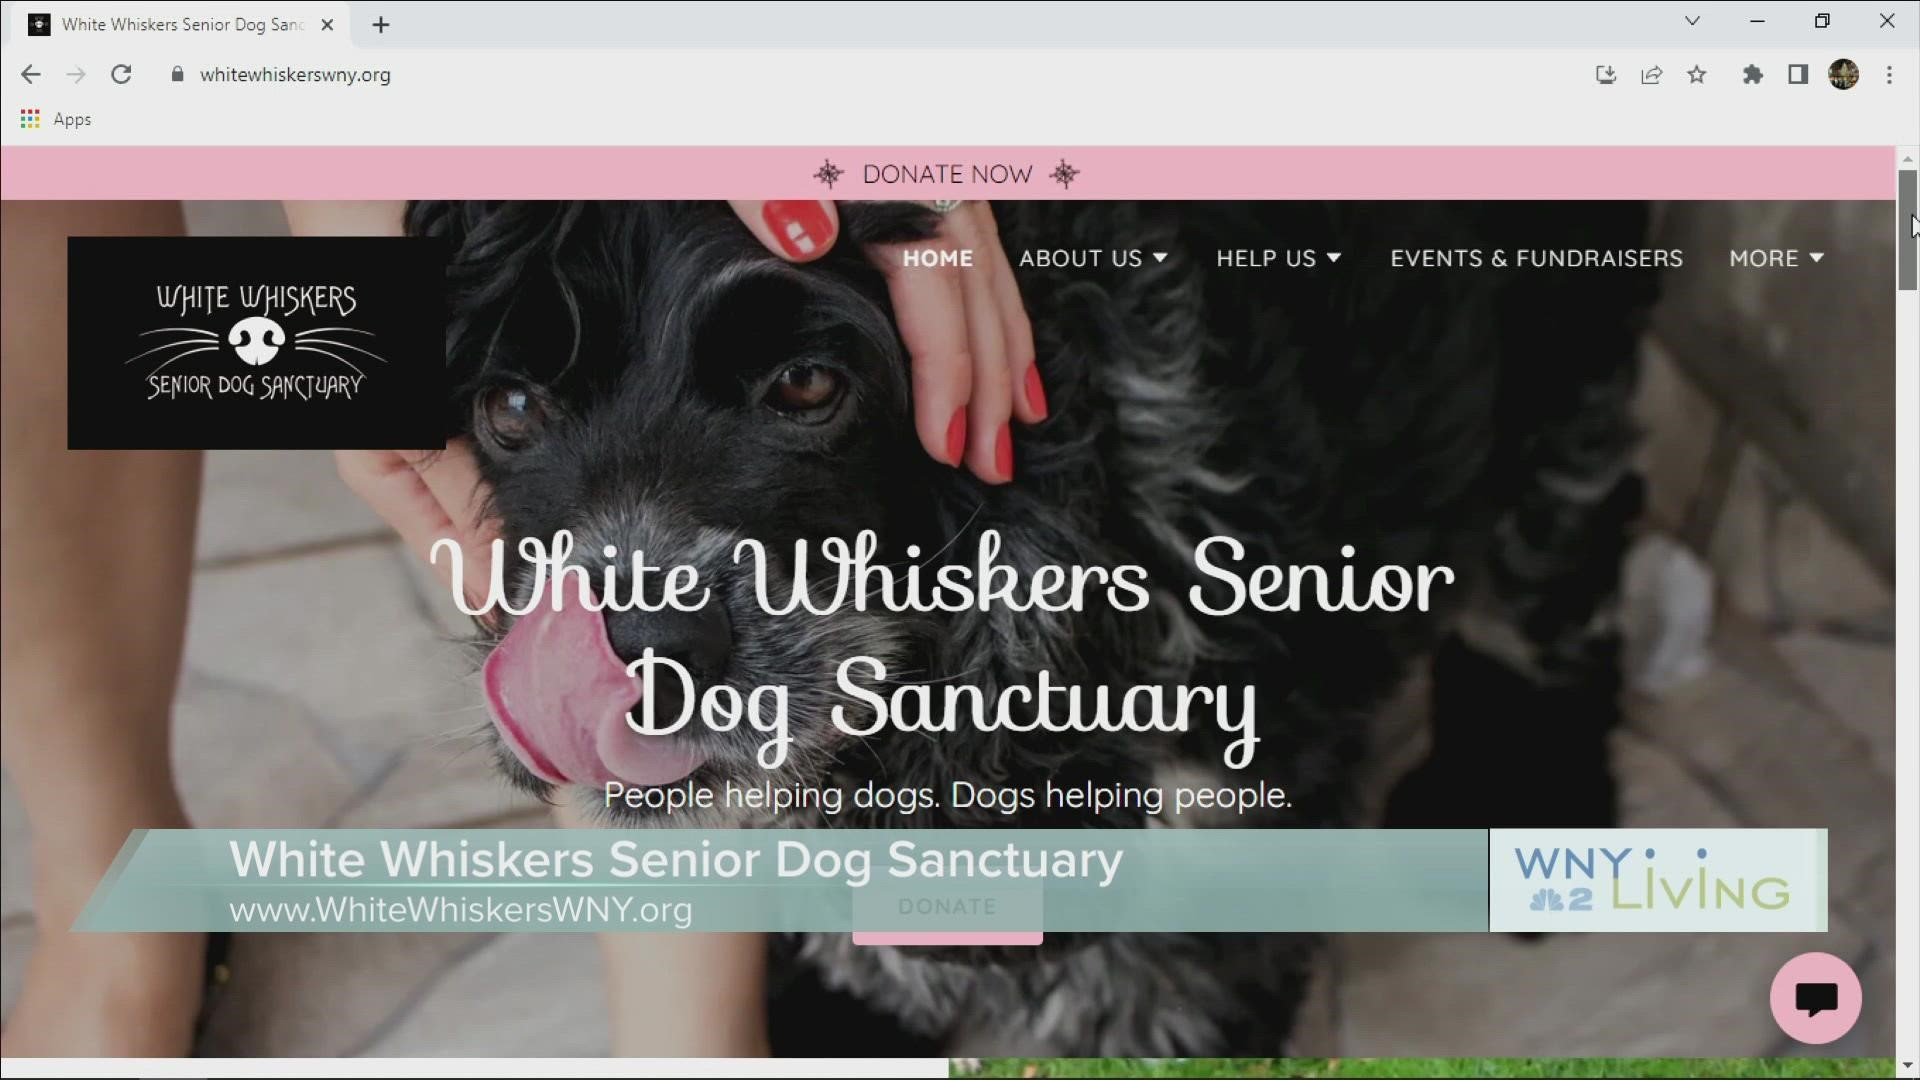 WNY Living - June 4 - White Whiskers Senior Dog Sanctuary (THIS VIDEO IS SPONSORED BY WHITE WHISKERS SENIOR DOG SANCTUARY)